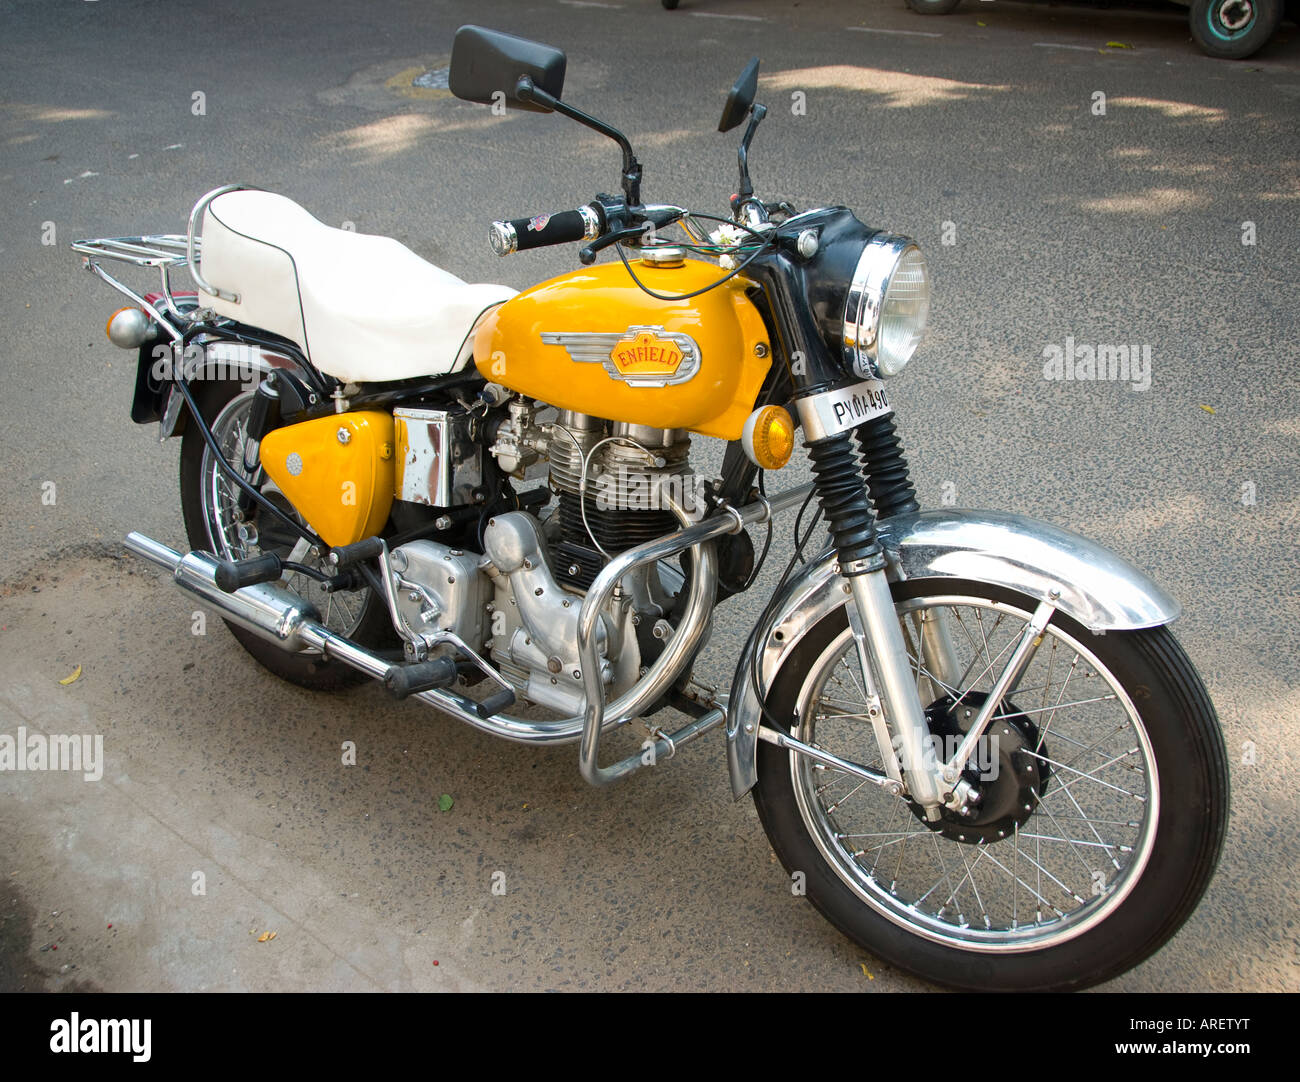 Enfield motorbike from the seventies Stock Photo